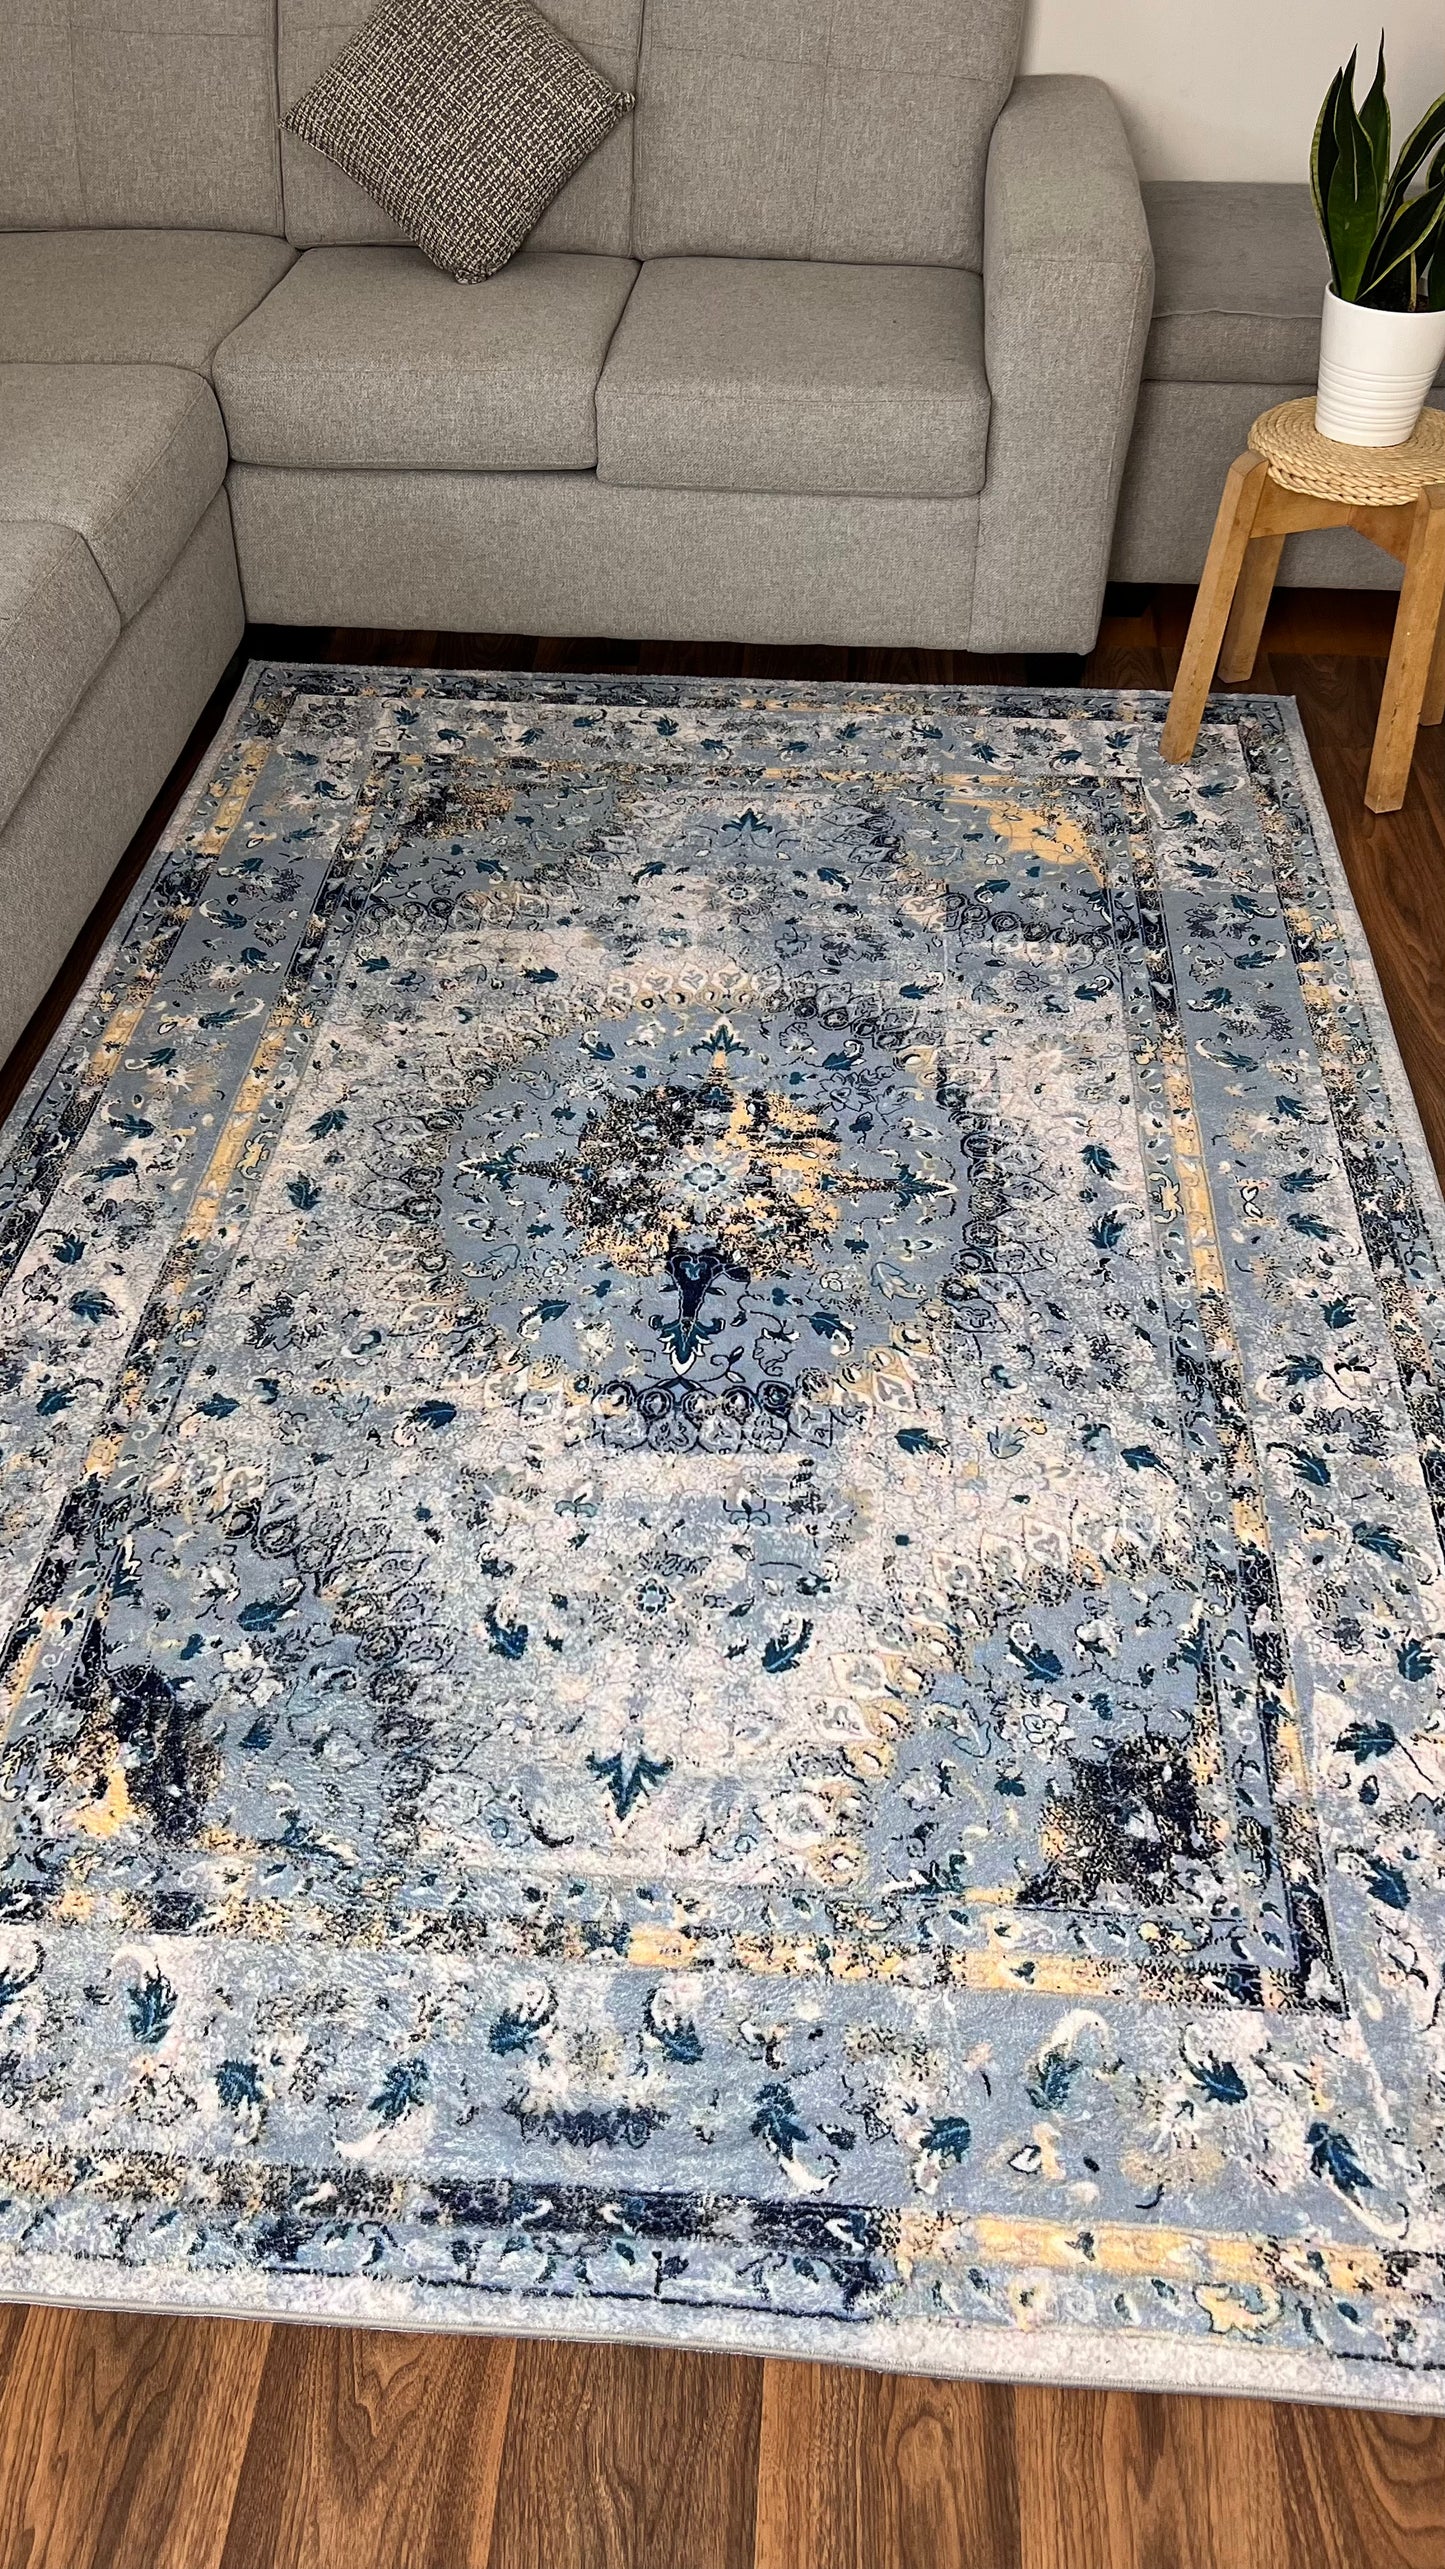 Whispers of Tradition: Persian Rugs for Today's Home